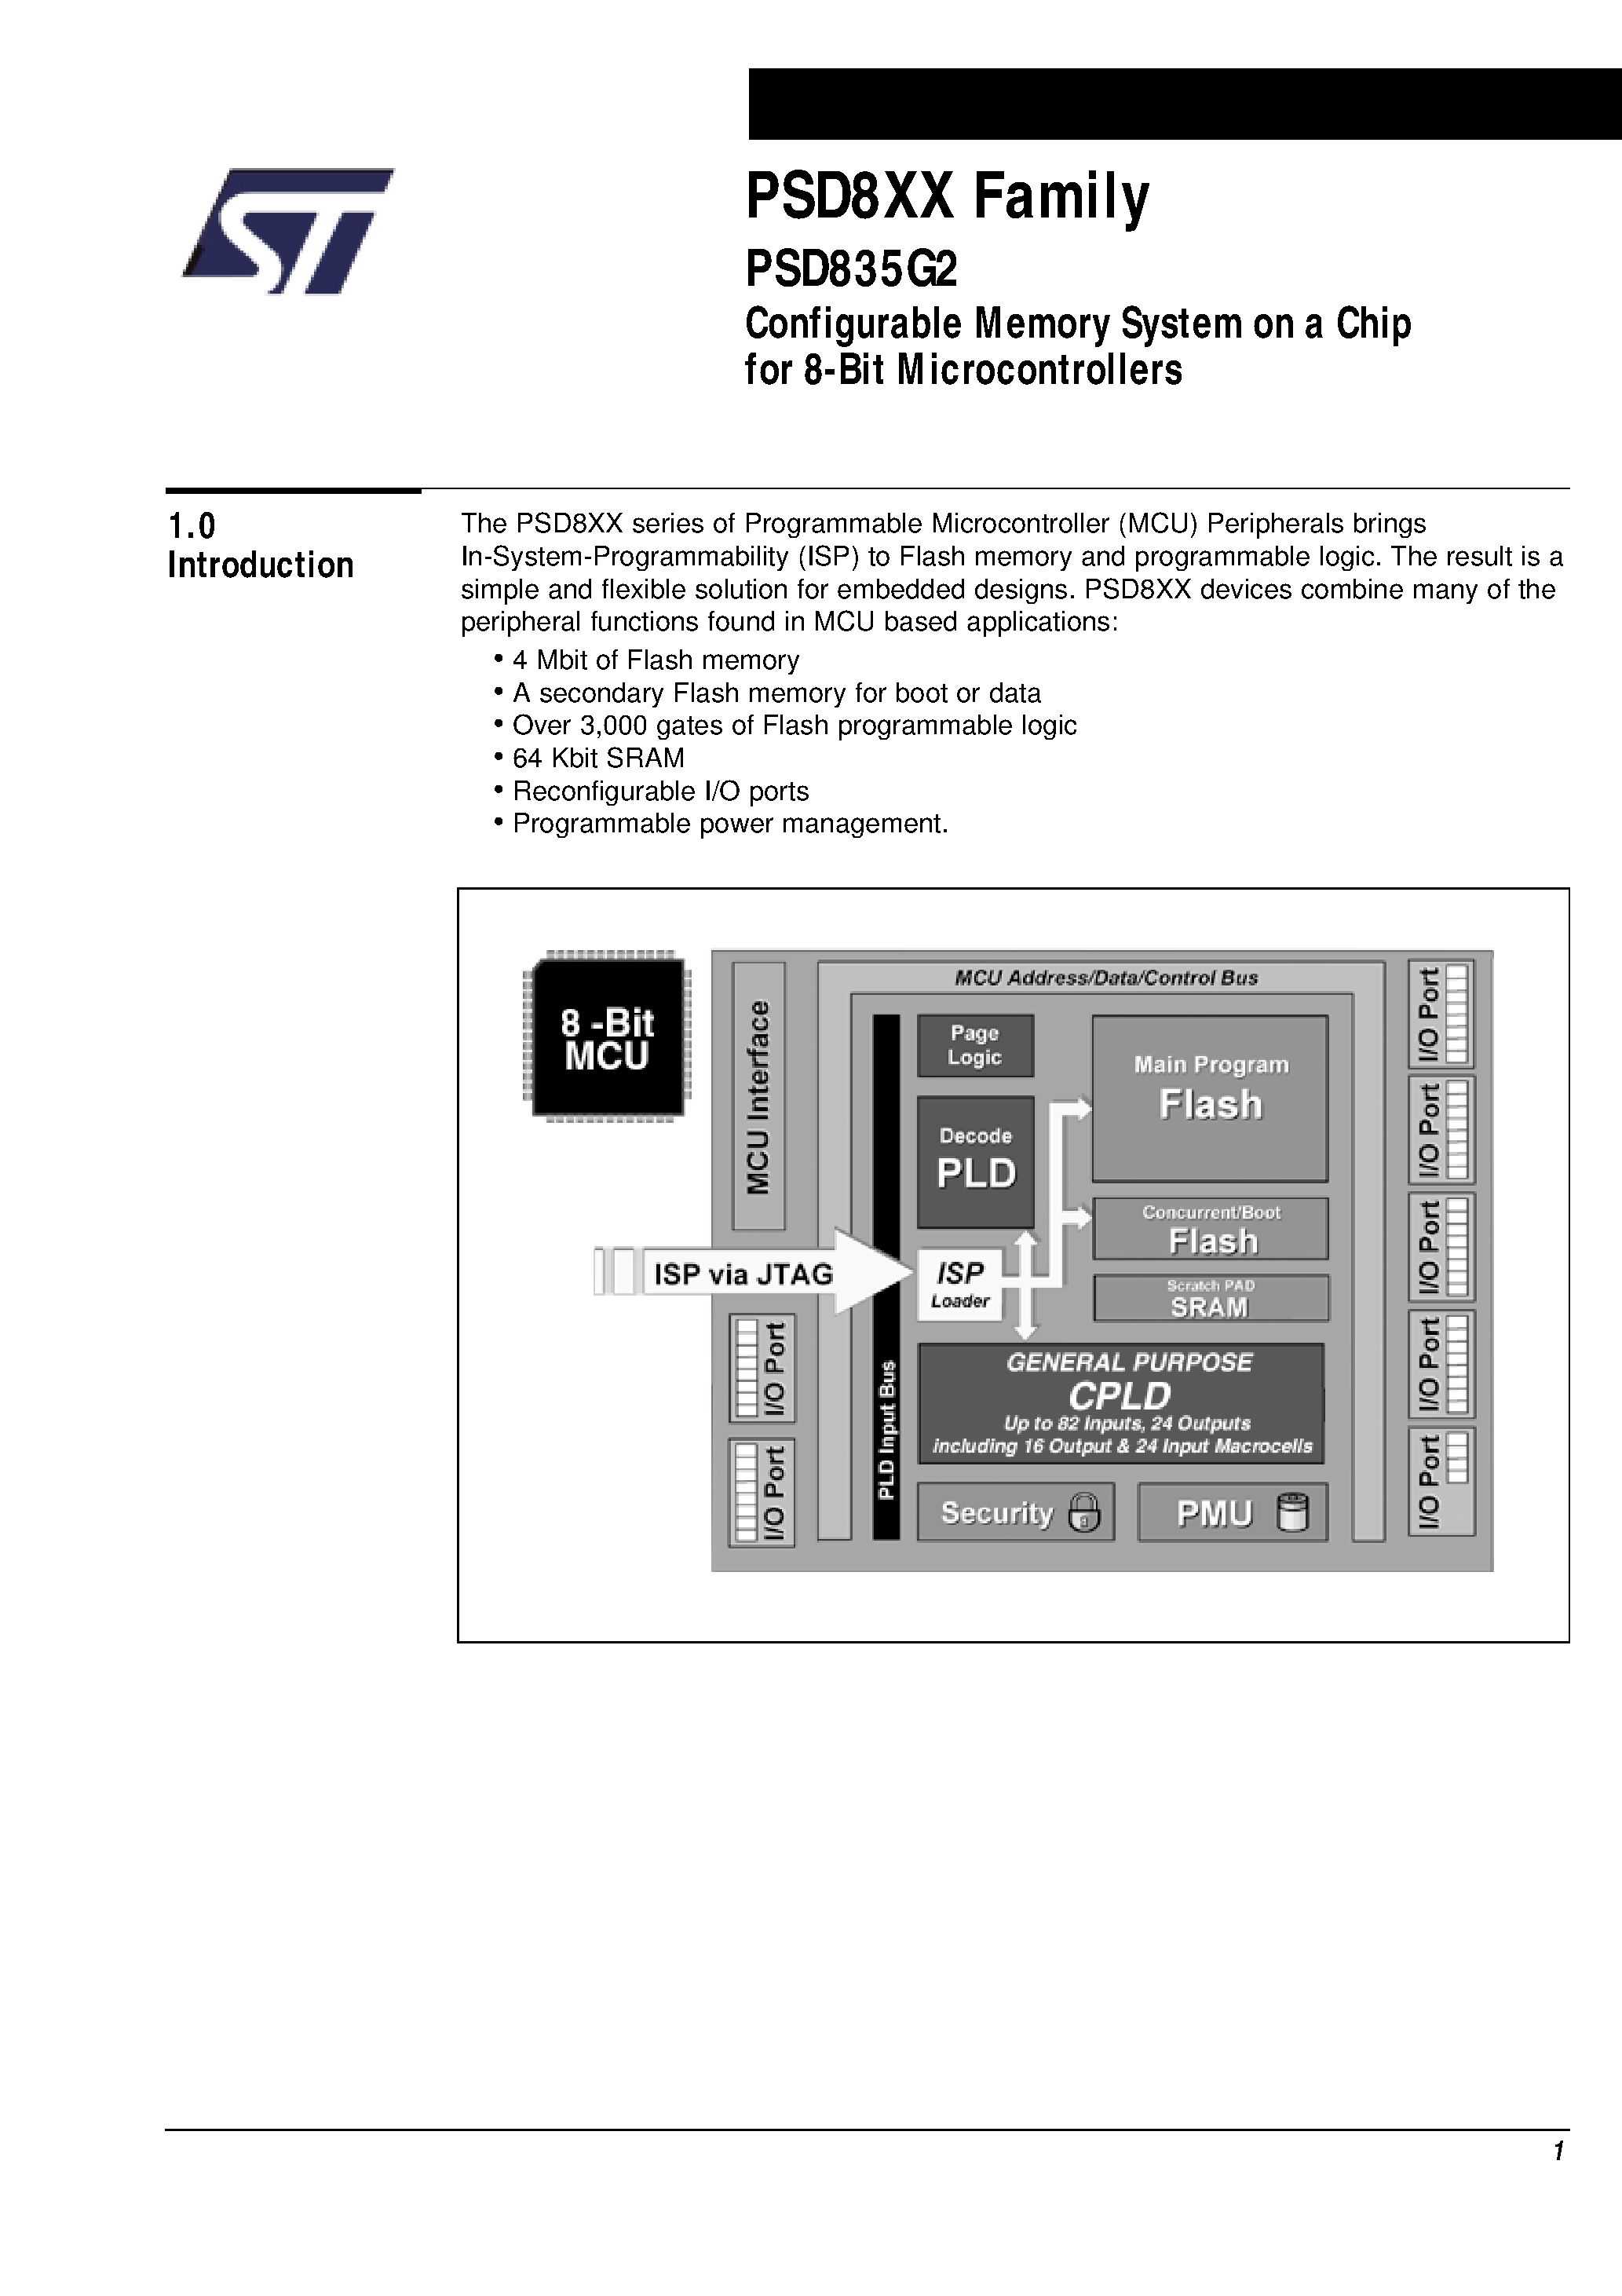 Datasheet PSD835F2V-A-70B81 - Configurable Memory System on a Chip for 8-Bit Microcontrollers page 2